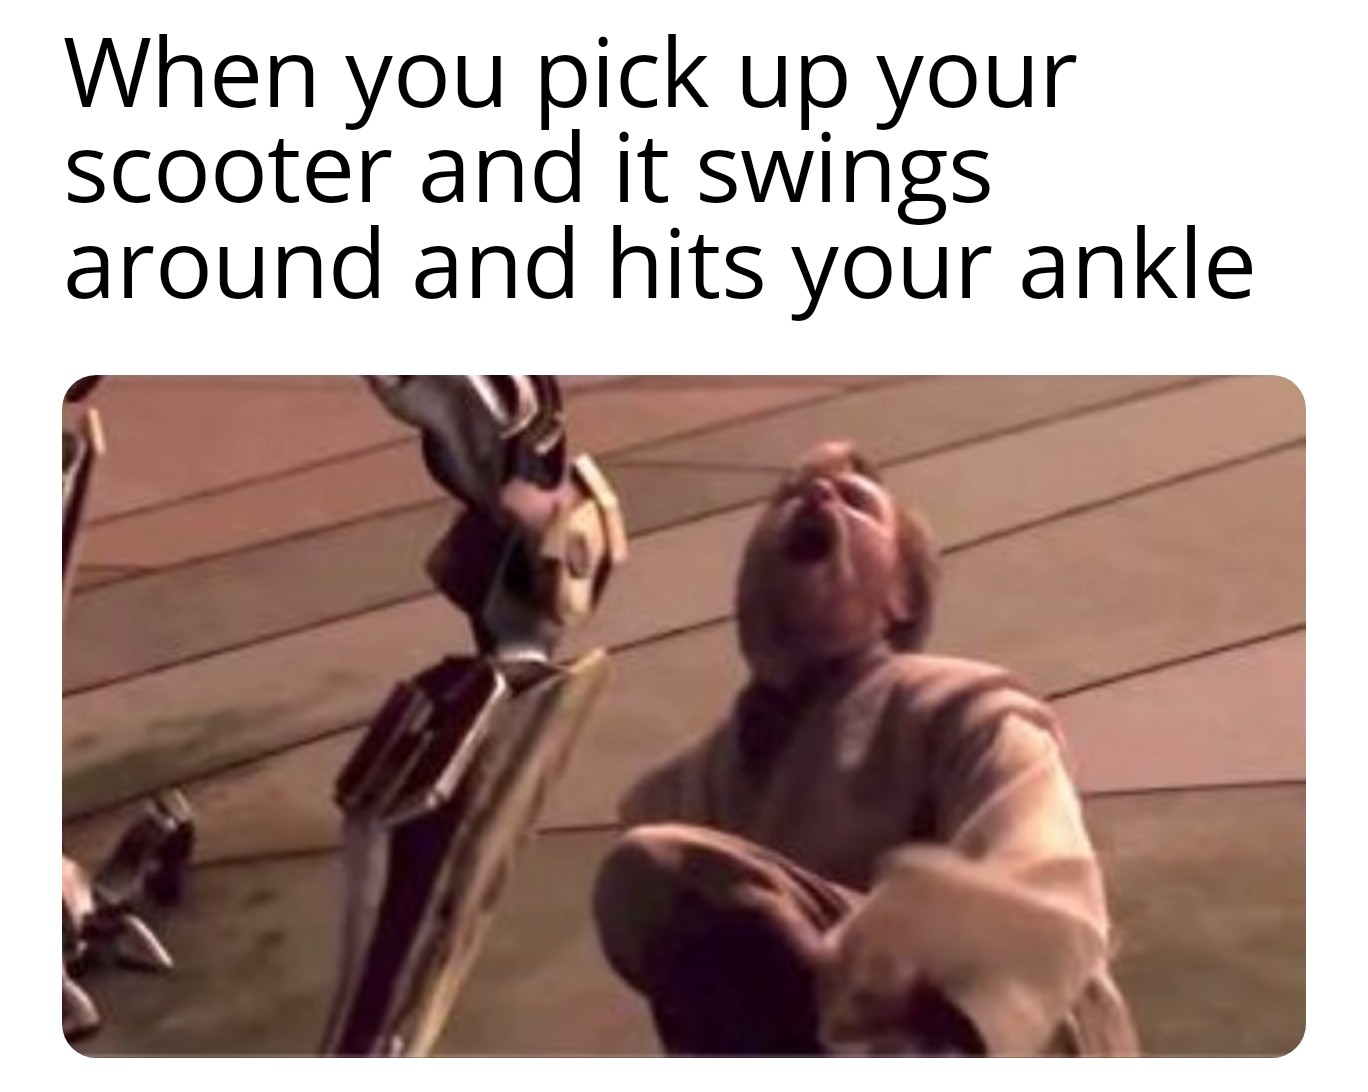 funny clean memes - When you pick up your scooter and it swings around and hits your ankle